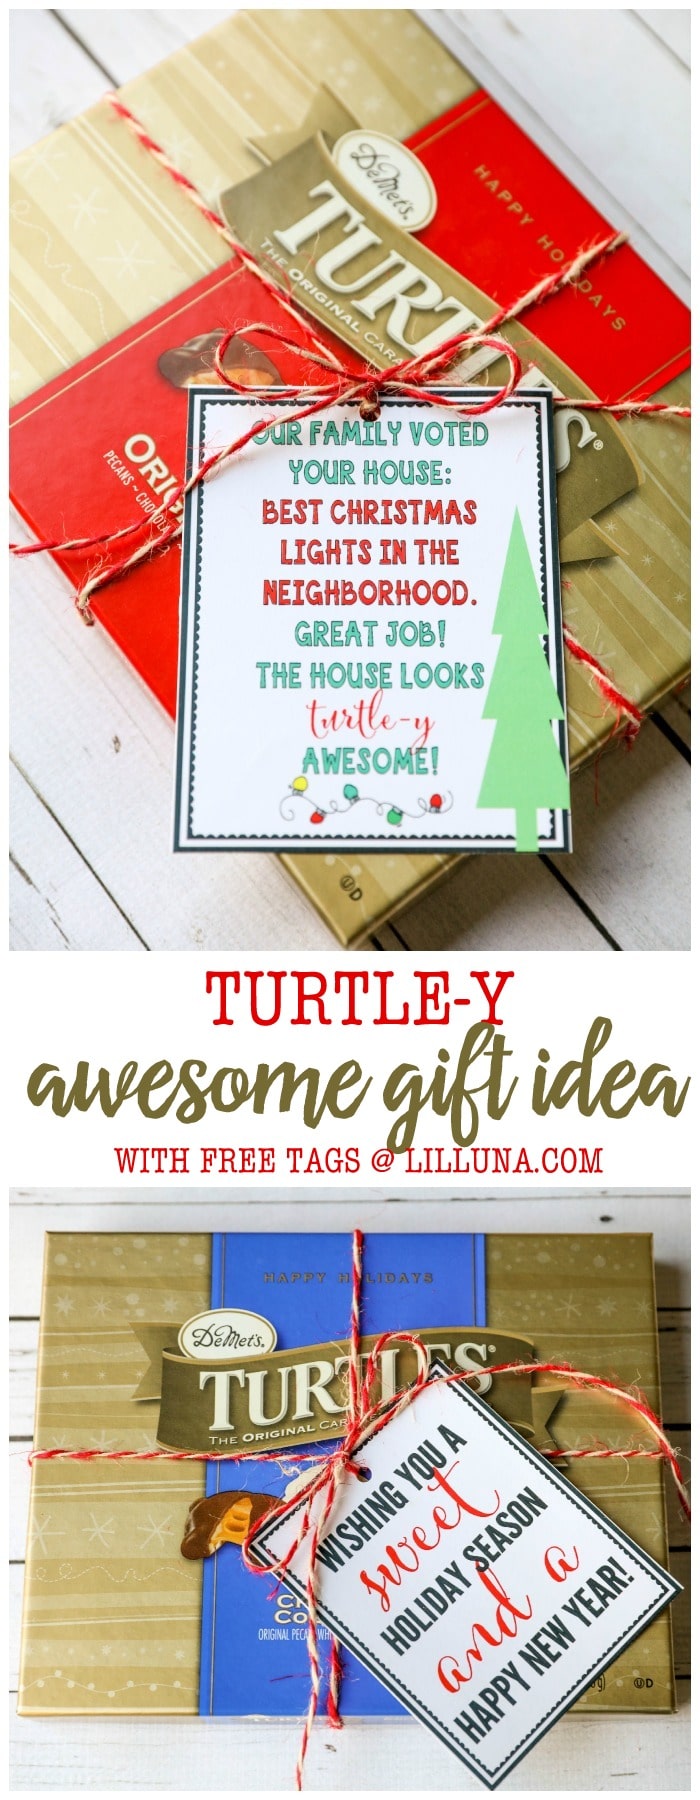 Turtle-y AWESOME gift idea!! A cute and simple gift idea to give this holiday season. Just attach the tags for a "sweet season" or to award to the "best Christmas lights in the neighborhood!"